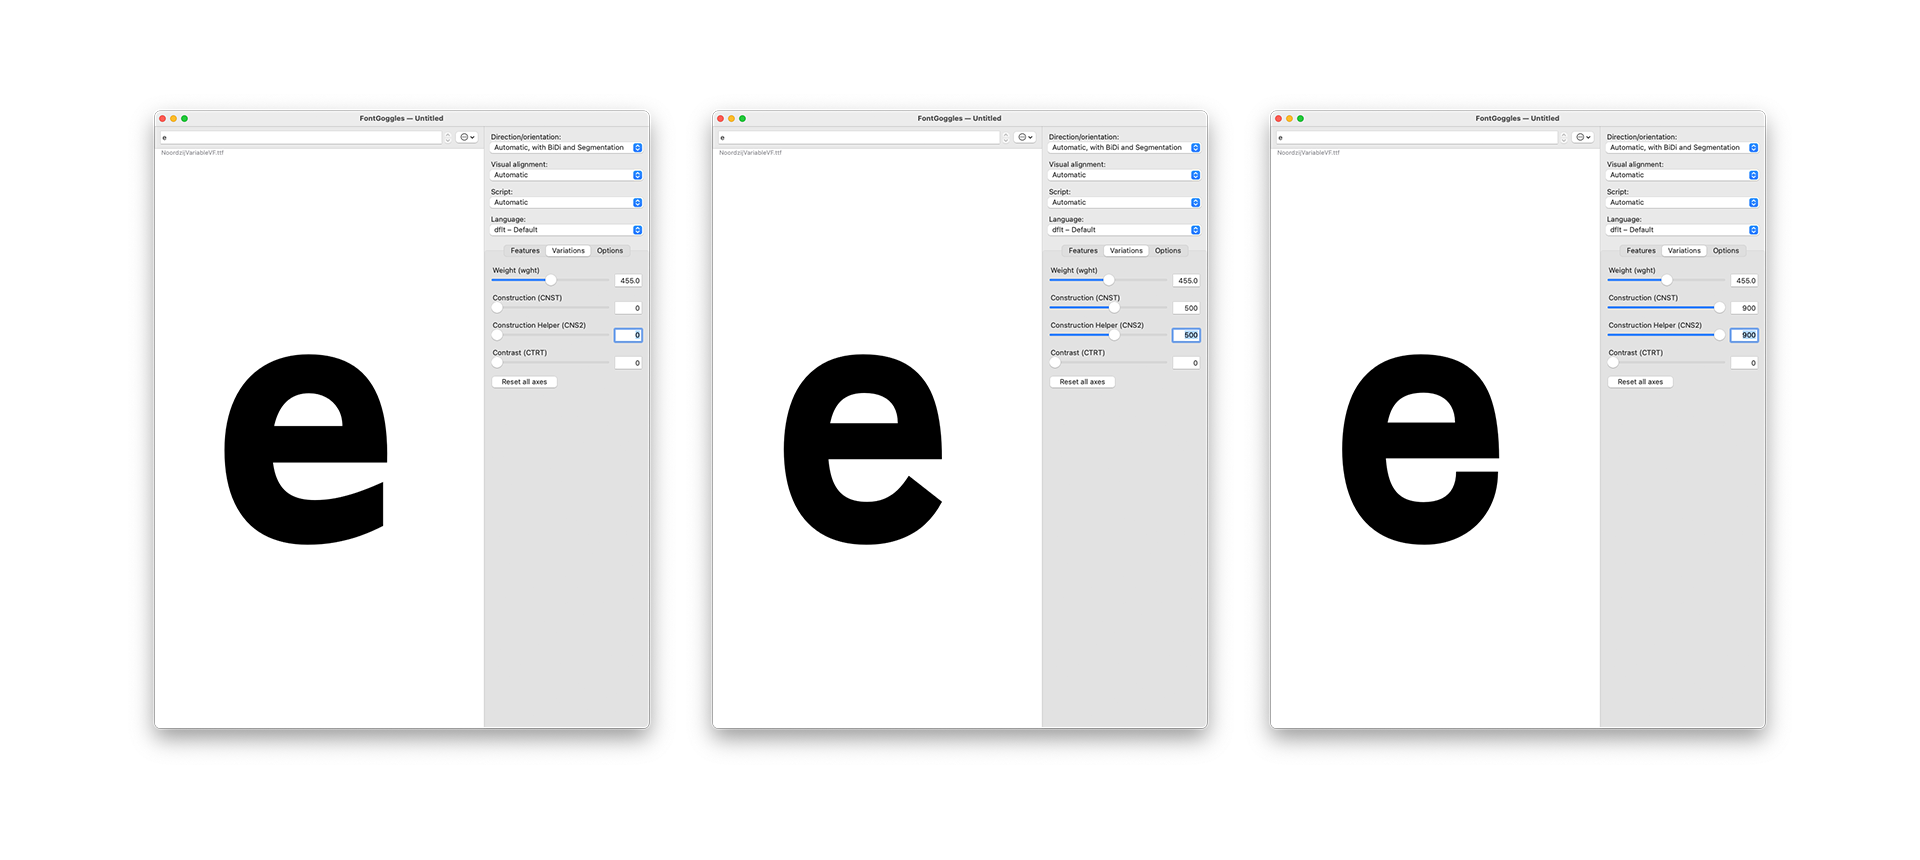 A window of FontGoggles showing a lowercase e. Two construction helper axes allow to control the tail of the e.